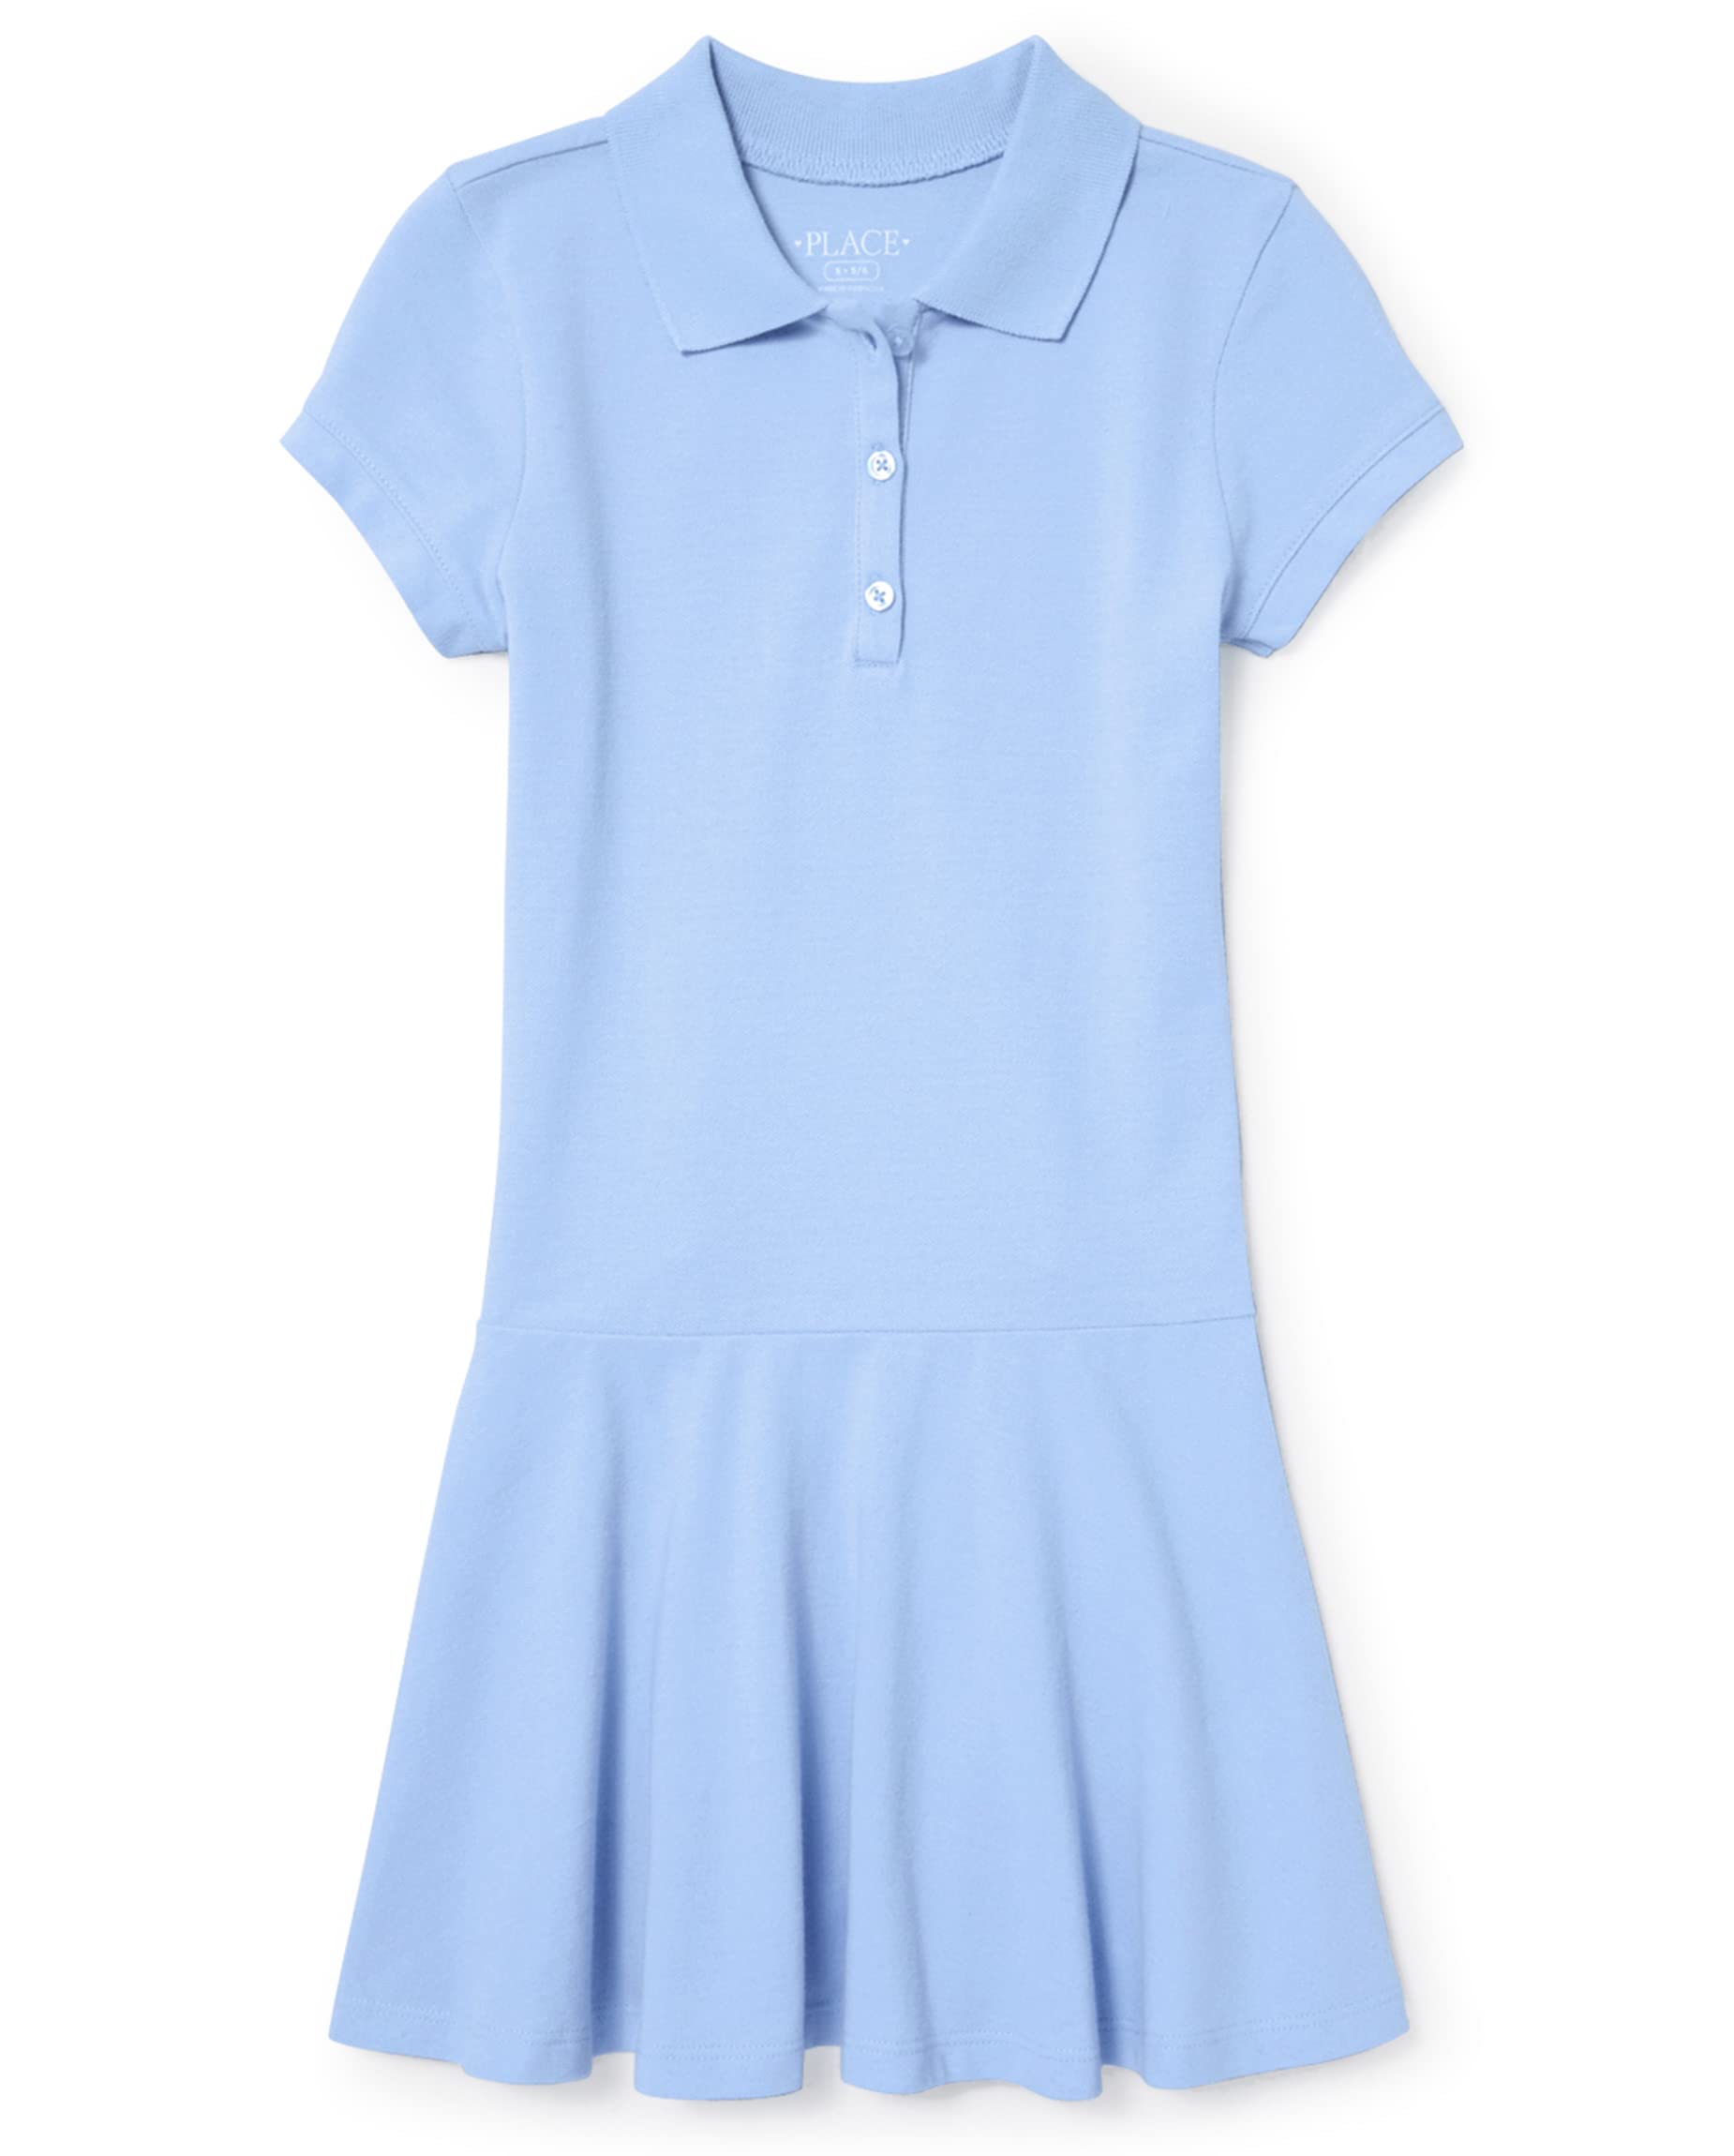 The Children's Place Girls' Pique Polo Dress